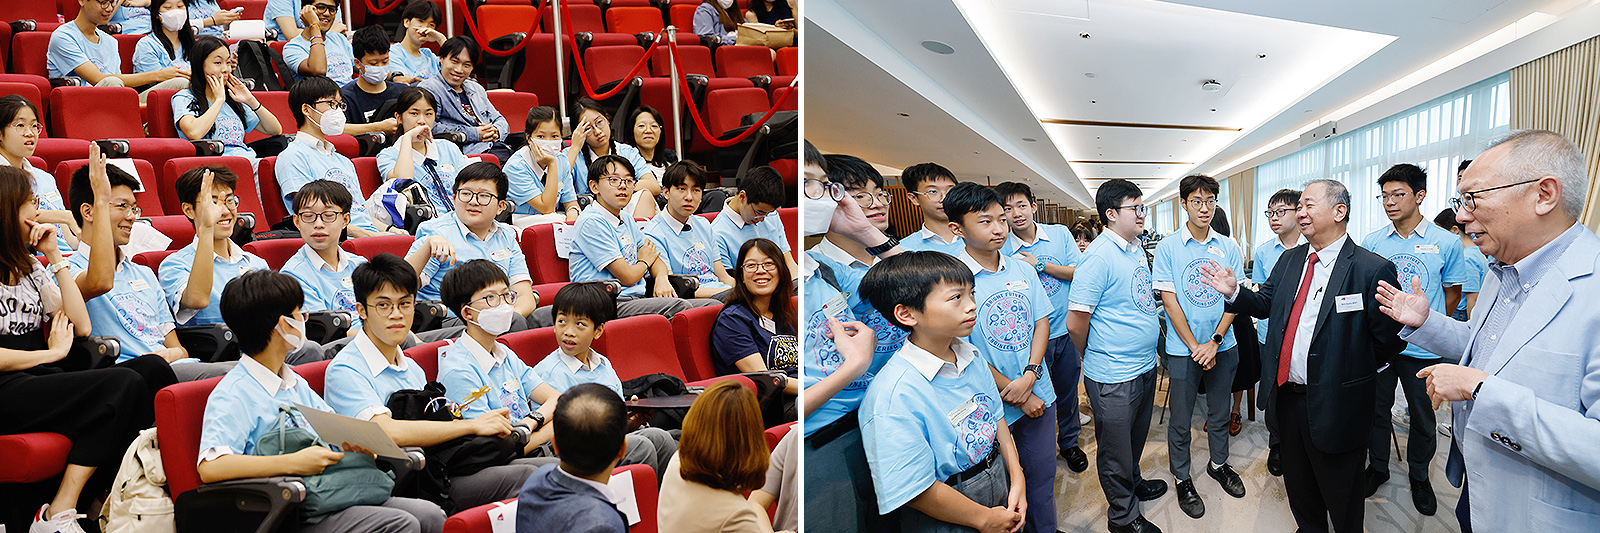 President Boey and Dr Chung talked to the students and encouraged them to unleash their creativity and challenge themselves.